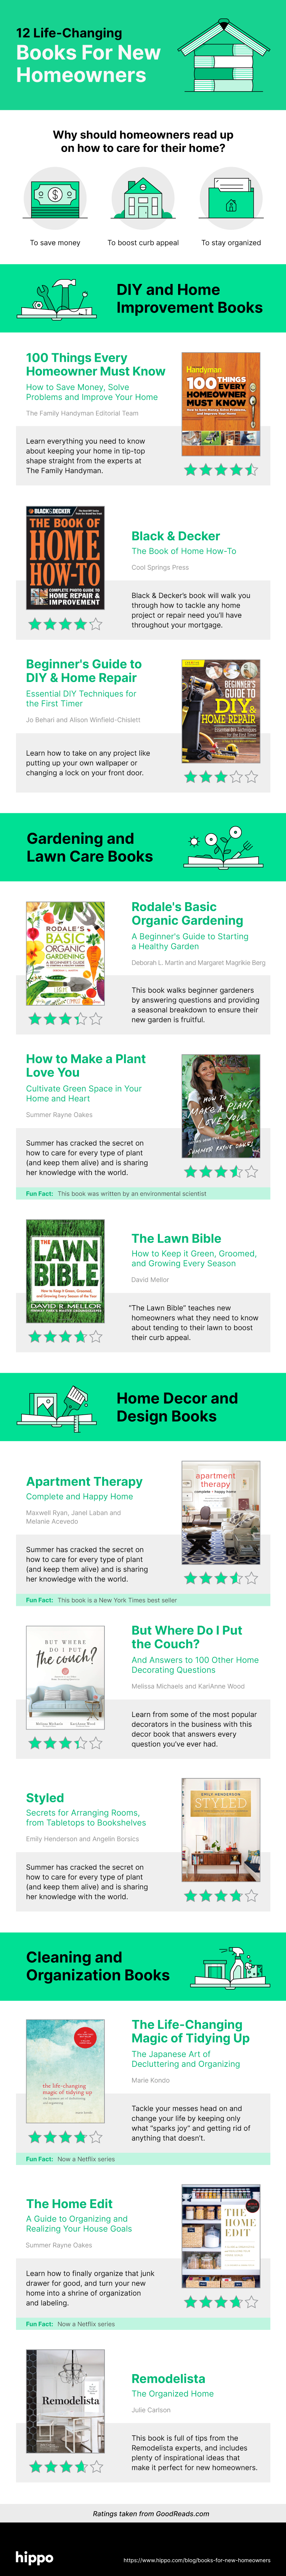 Books for Homeowners Infographic